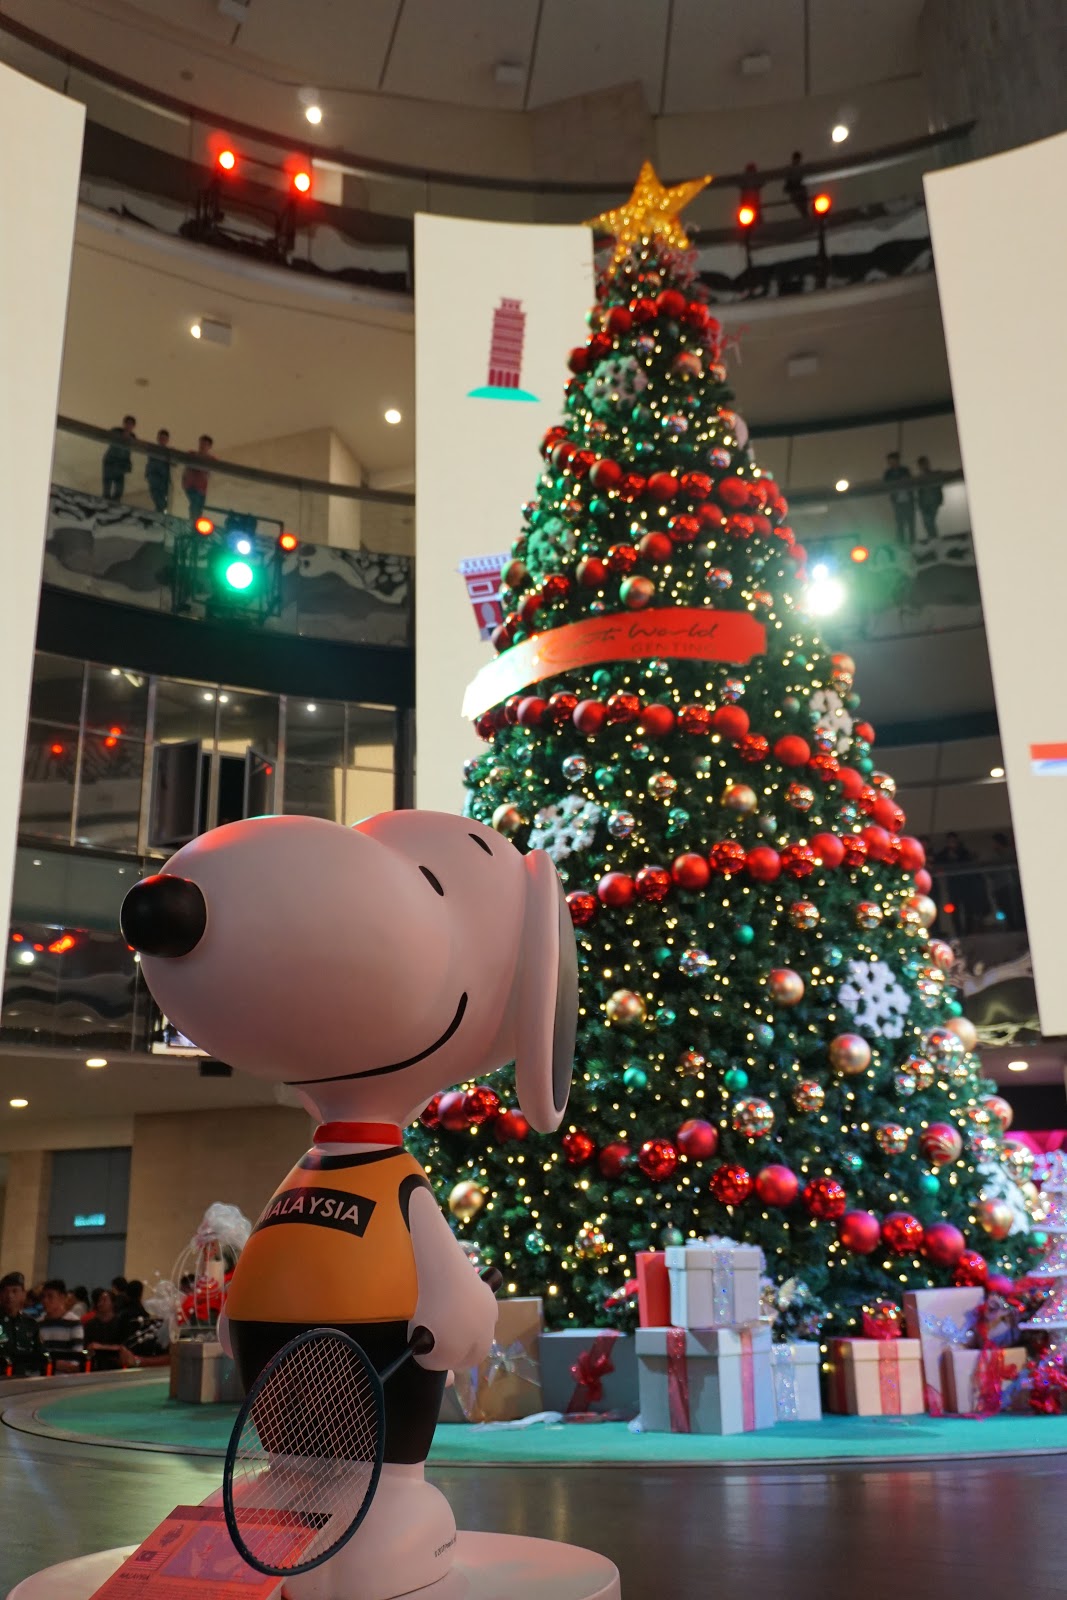 SKYMPHONY AND SNOOPY IN RESORTS WORLD GENTING